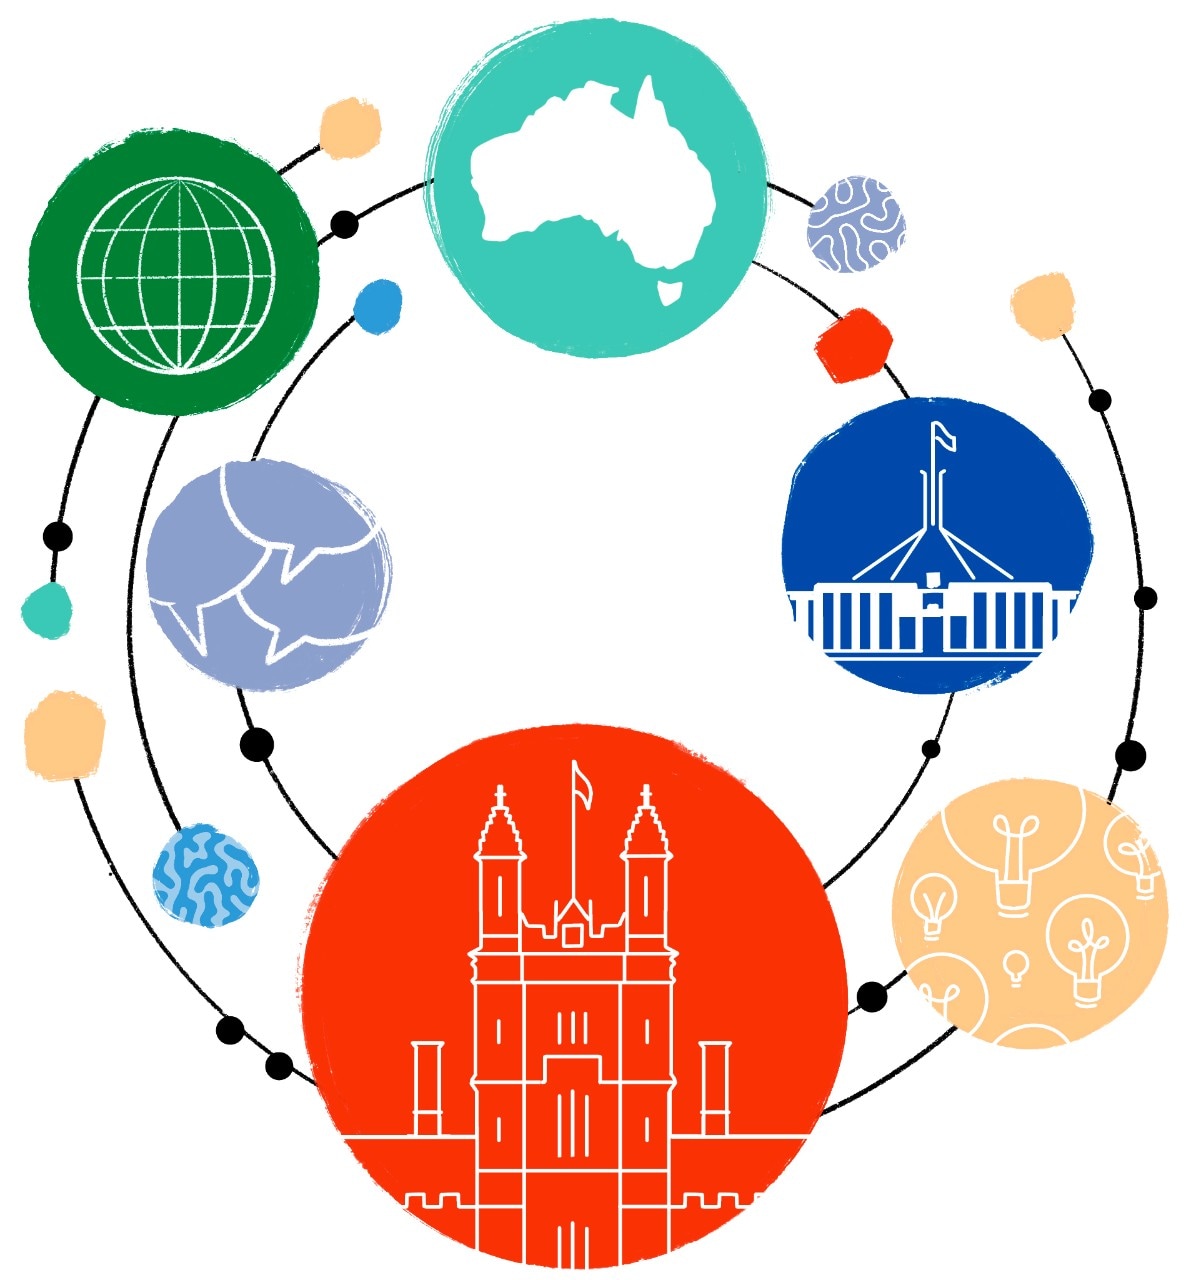 A globe, the outline of Australia and silhouettes of Parliament House in Canberra and the Quadrangle at the University of Sydney are arranged in concentric circles as if orbiting each other